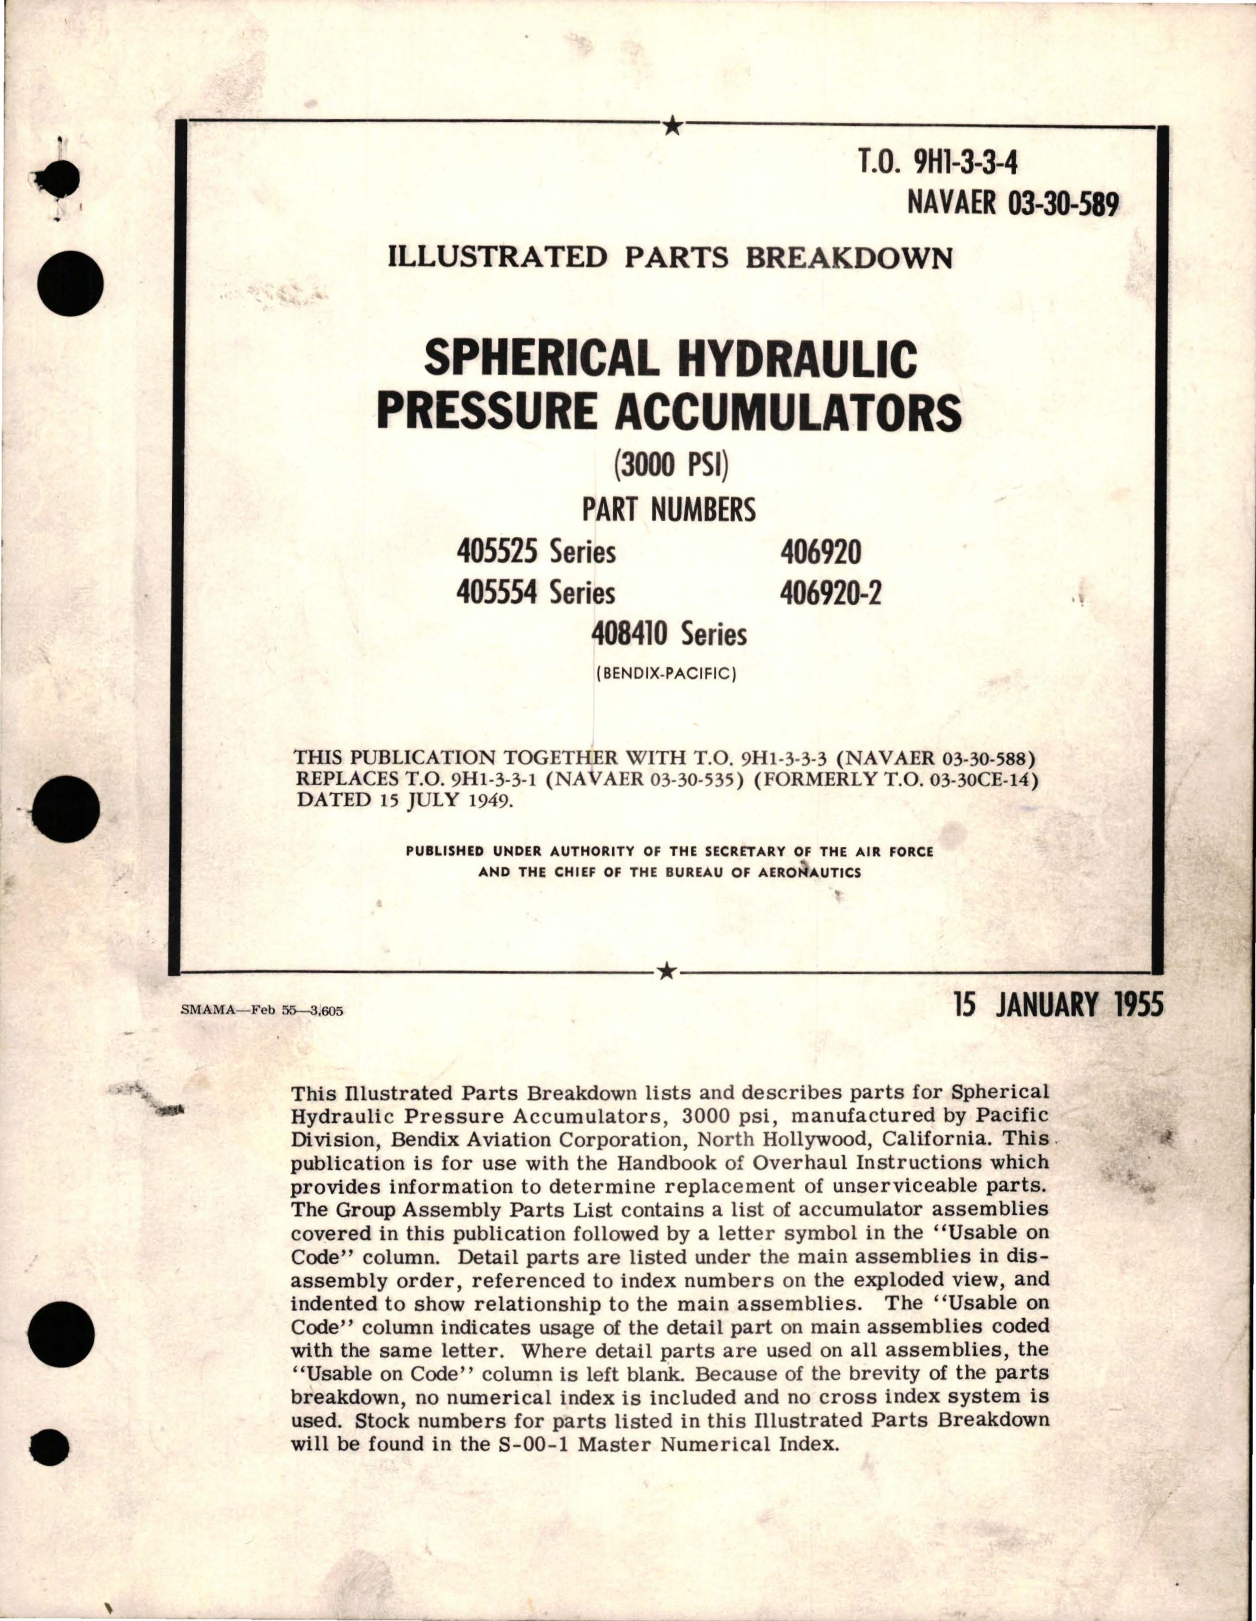 Sample page 1 from AirCorps Library document: Illustrated Parts Breakdown for Spherical Hydraulic Pressure Accumulators - 300 PSI - Parts 405525, 405554, 406920, 406920-2, and 408410